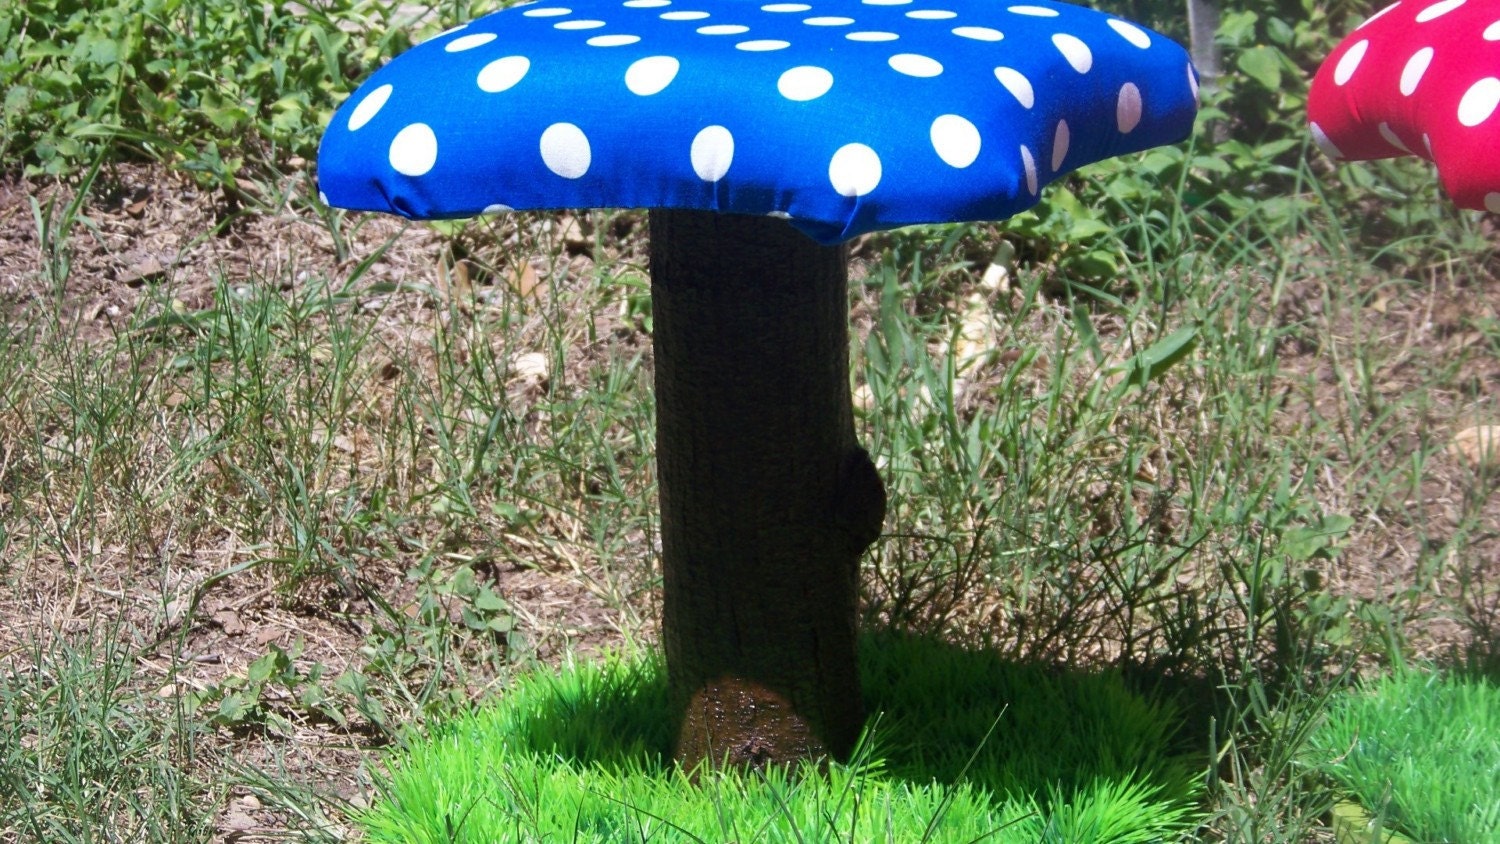 Whimsical Blue and White Polka Dot Toadstool Mushroom Chair tree play house dollhouse doll artificial grass kids frog furniture indoor/outdoor fort birthday gift kid fairy forest smurfs party smurf childrens fairies vintage land retro gnome room decor NEW